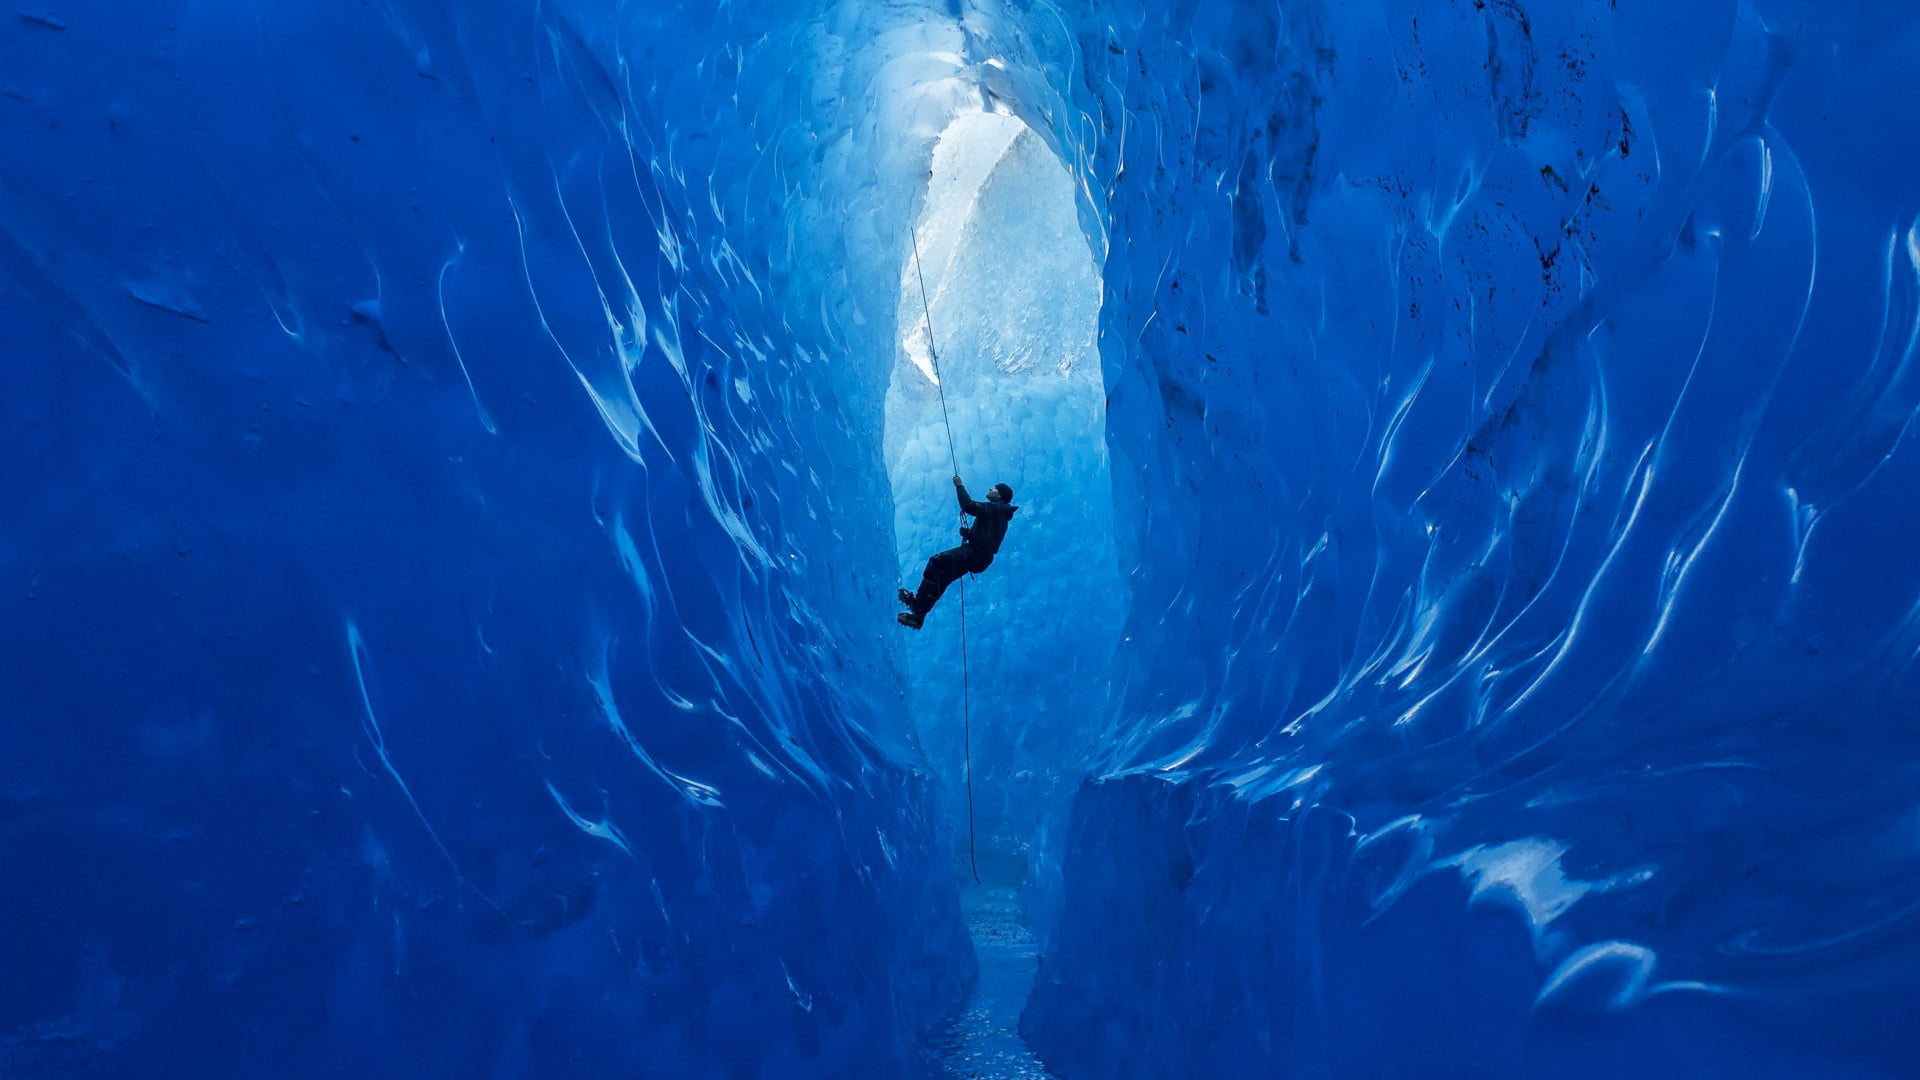 cave, ice, nature, blue, underwater, sea, swimming, sport, beauty in nature